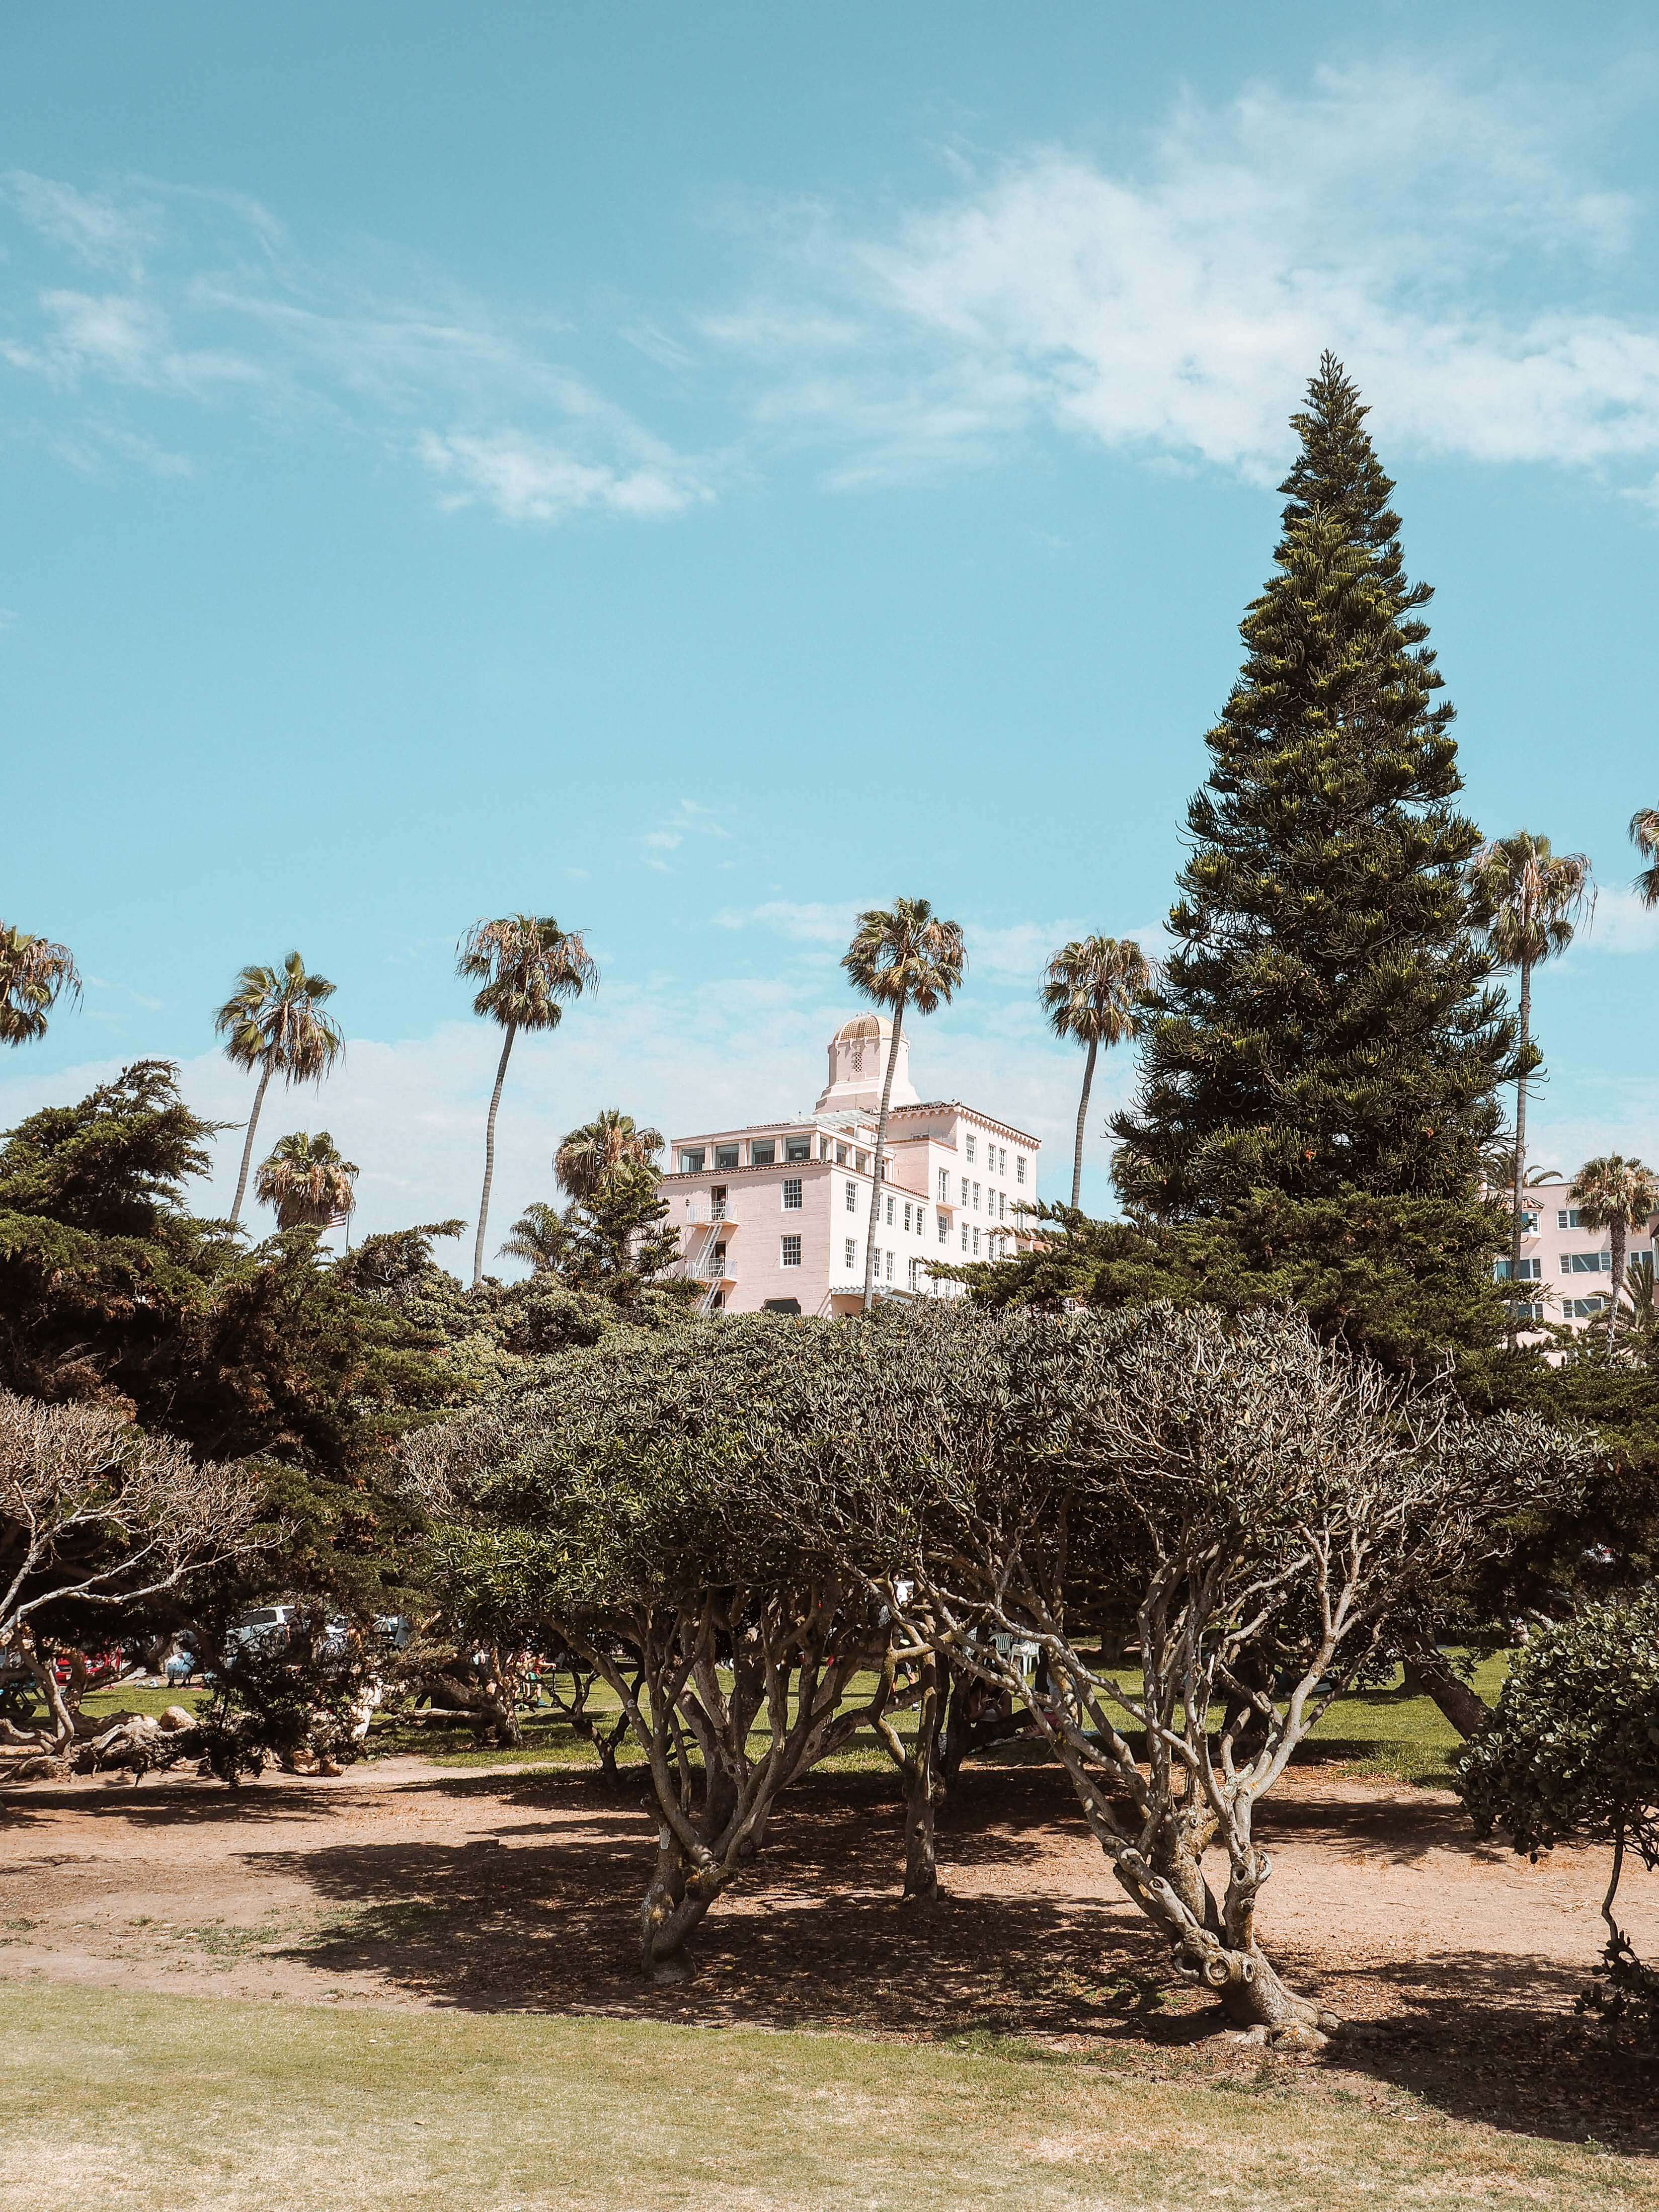 How To Spend A Weekend In San Diego